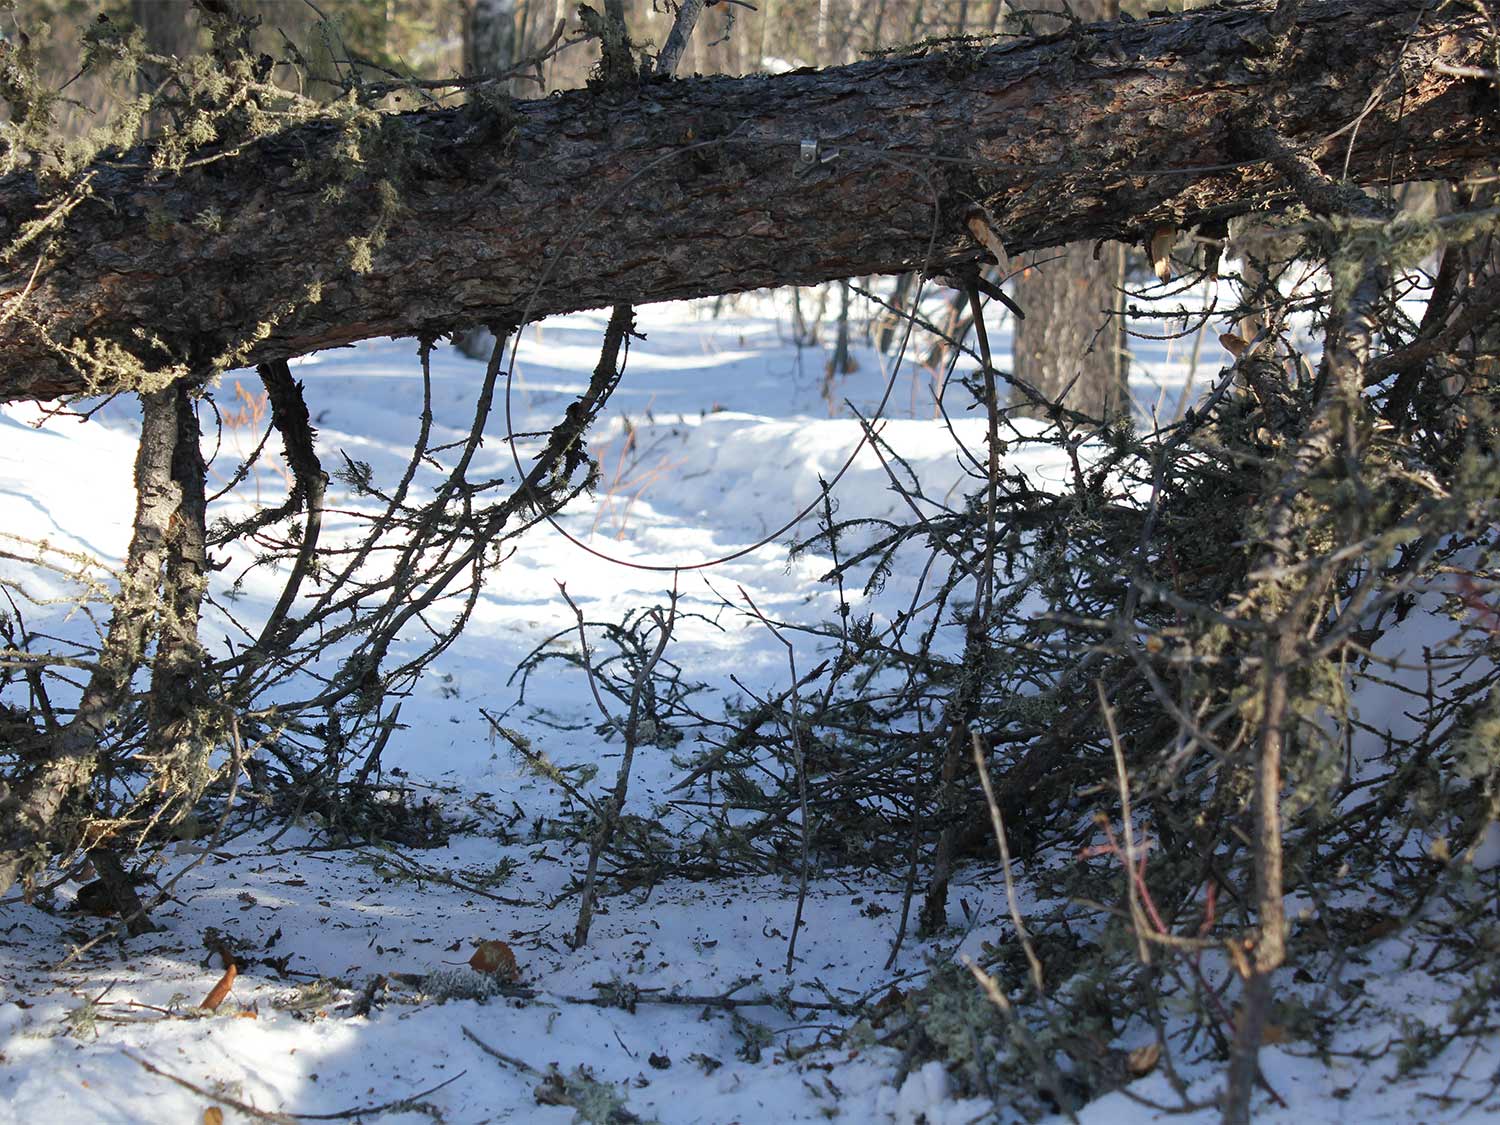 A tree fallen across a trail provides a perfect snare set